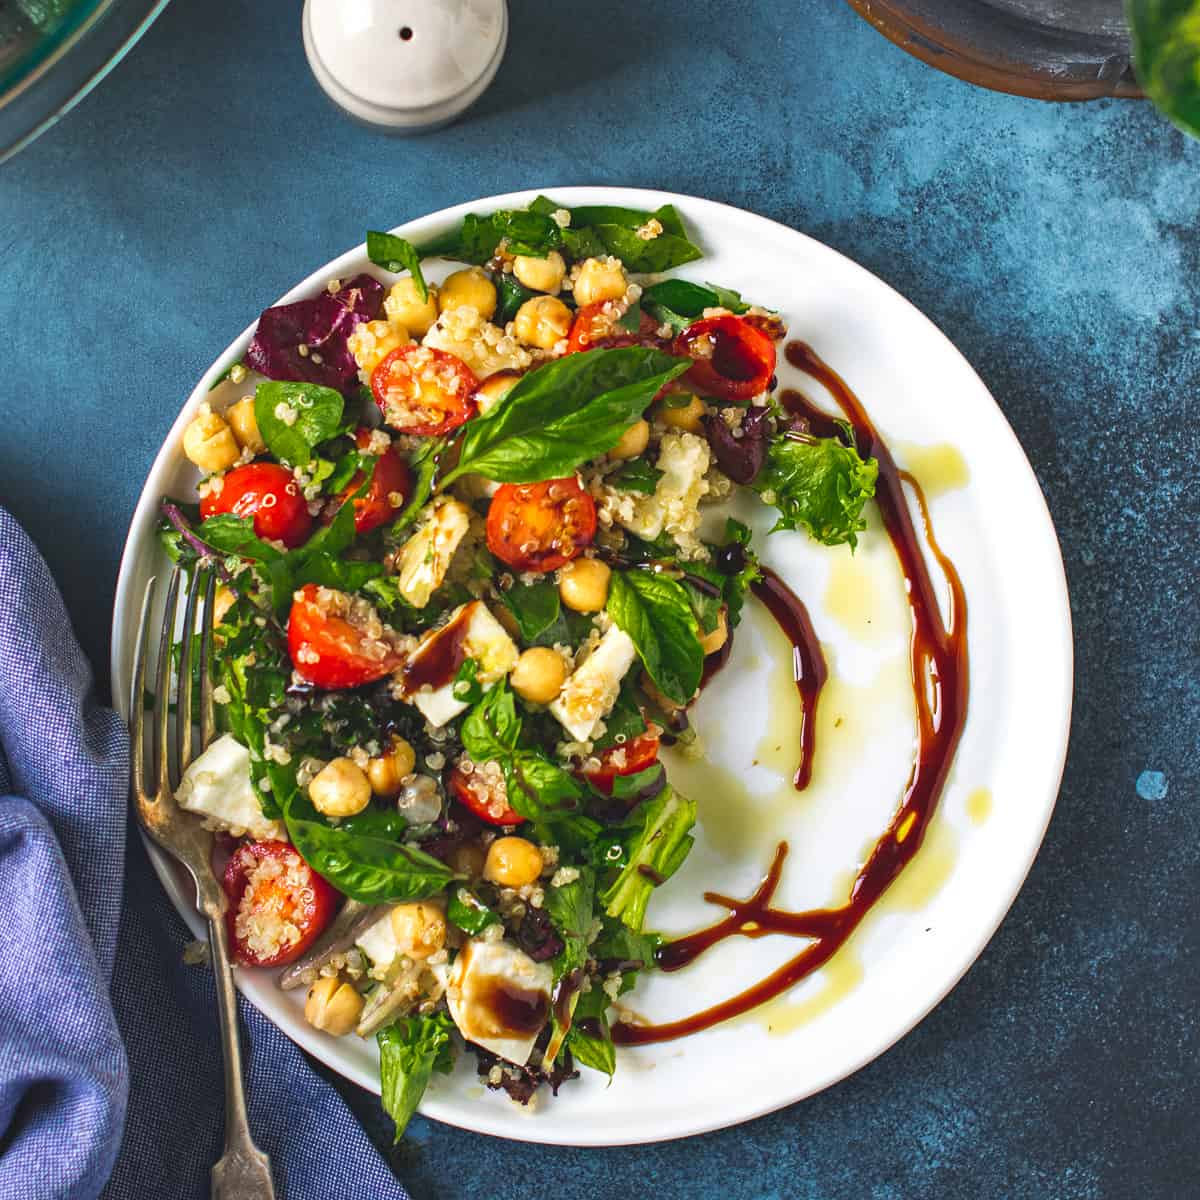 Special occasion or date night salad recipe